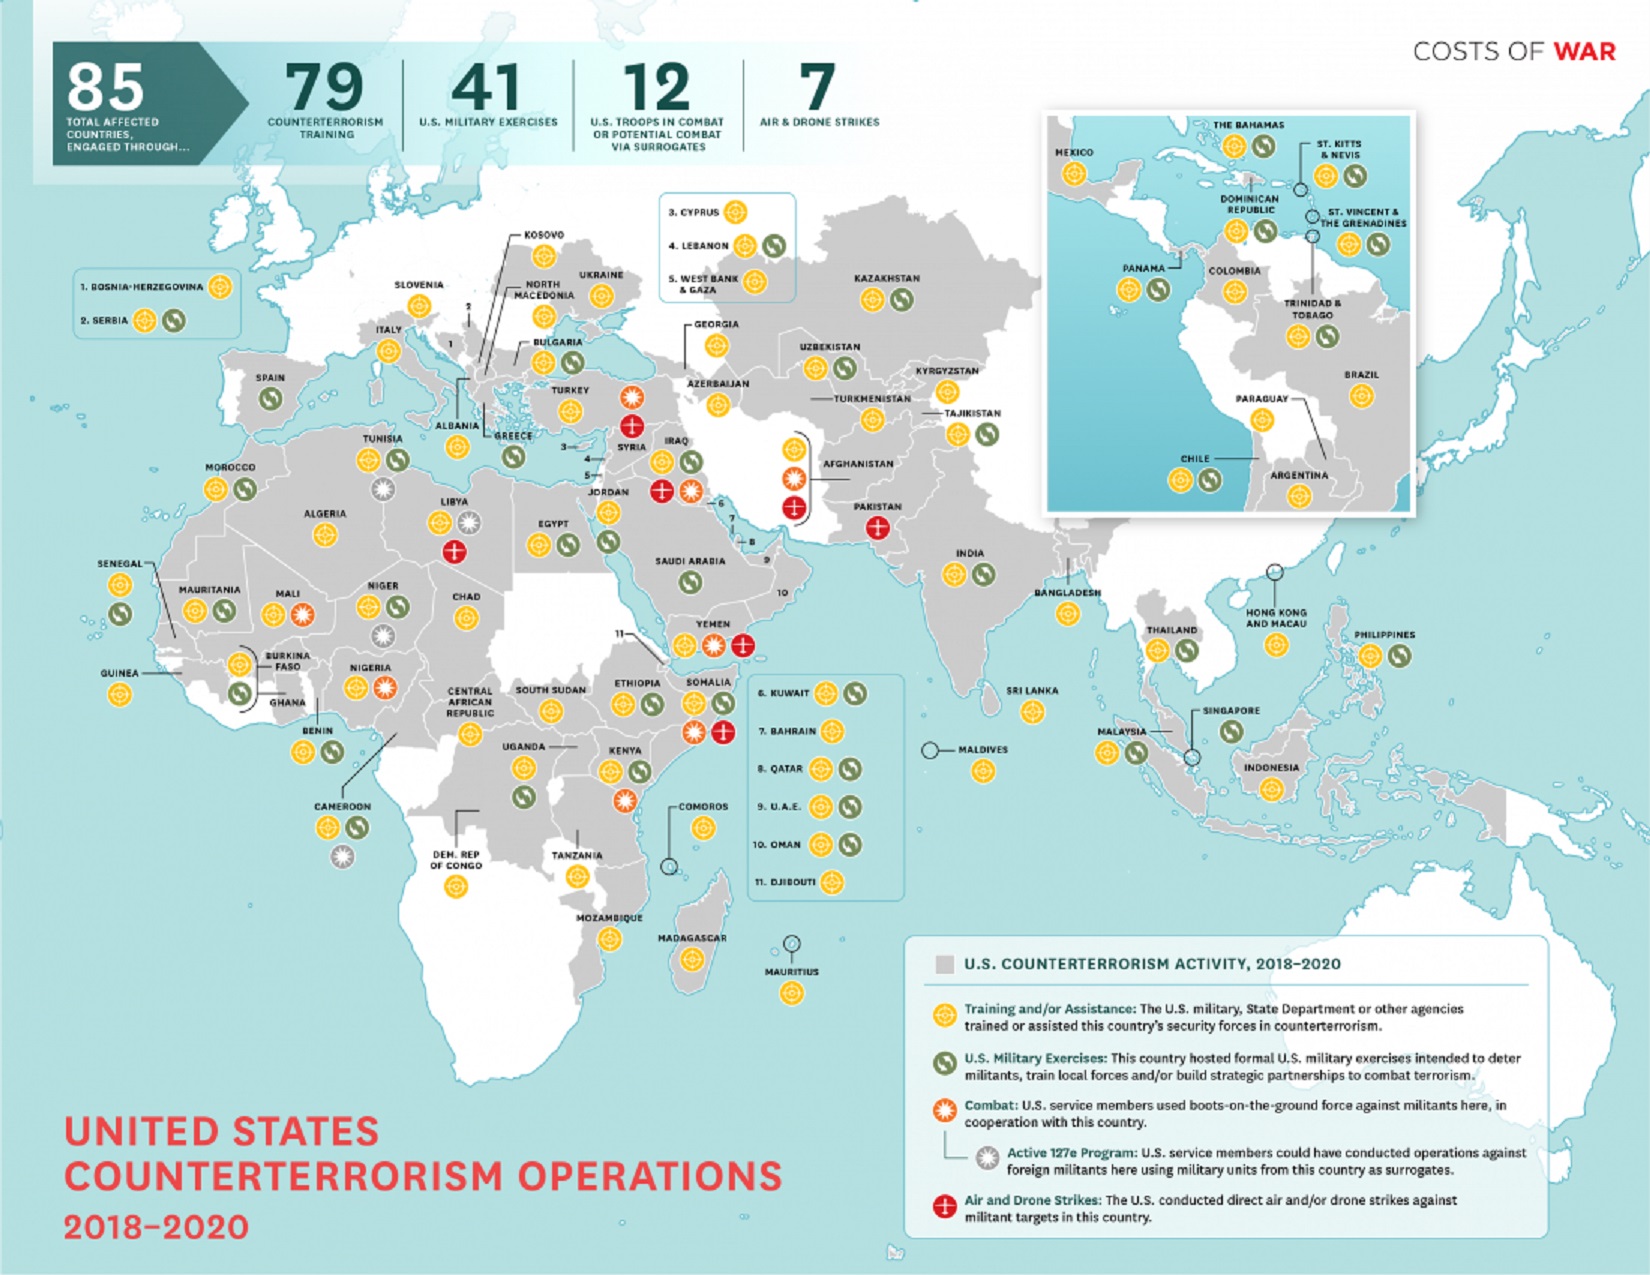 World map displaying location and nature of US military operations, with various symbols